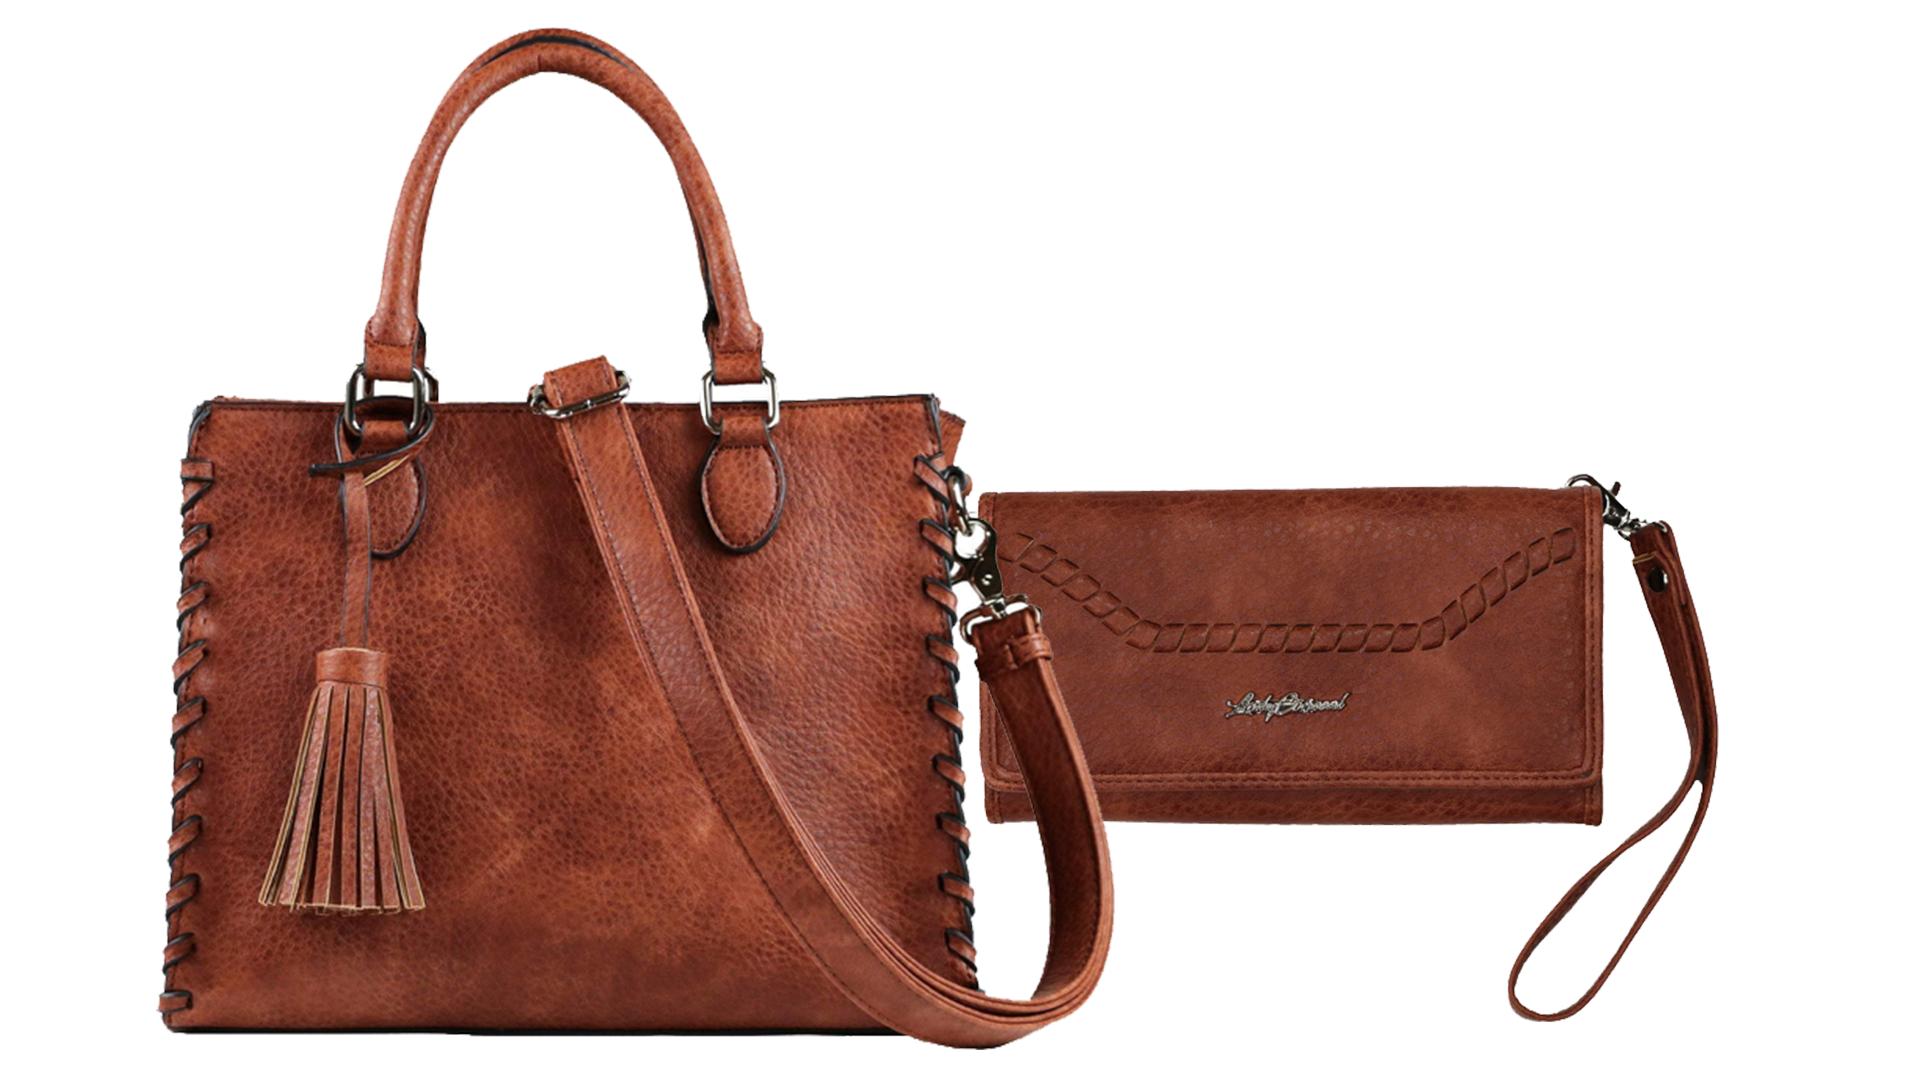 CONCEALED CARRY PURSE BLAKE SCOOPED LEATHER CROSSBODY (Cognac)